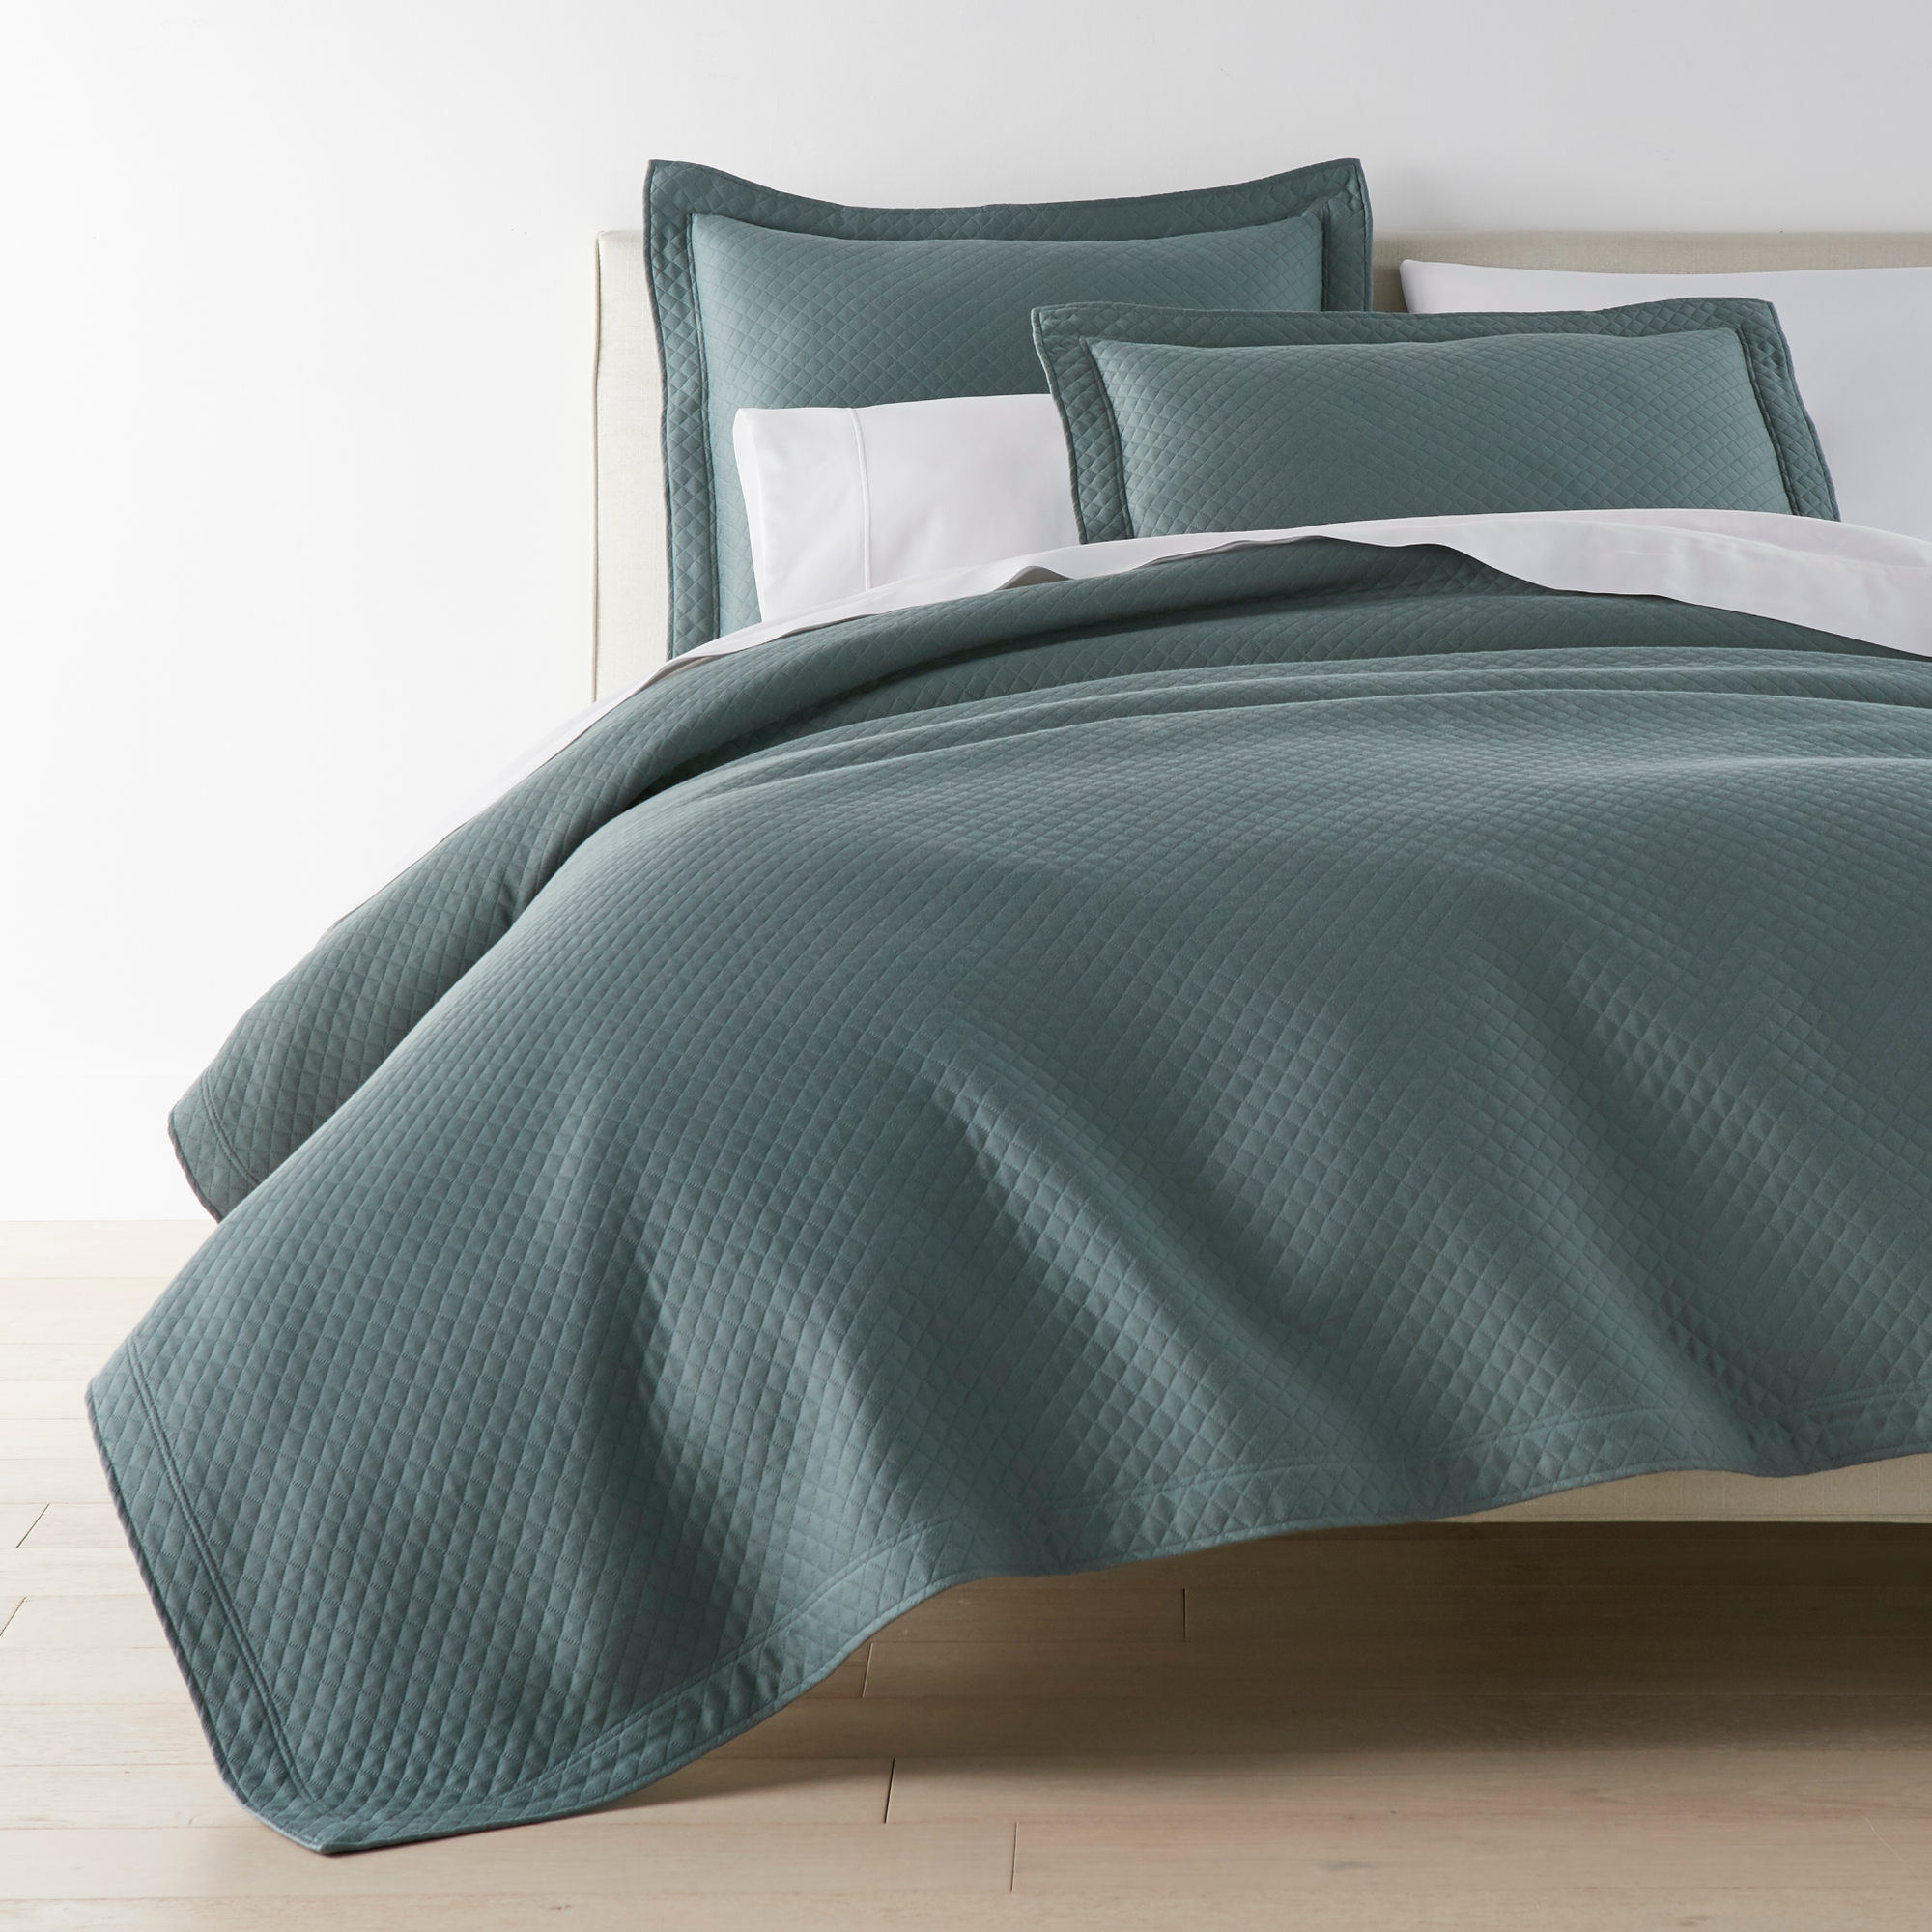 Full Bedding of Peacock Alley Oxford Matelassé Coverlets and Shams Collection Color Spruce